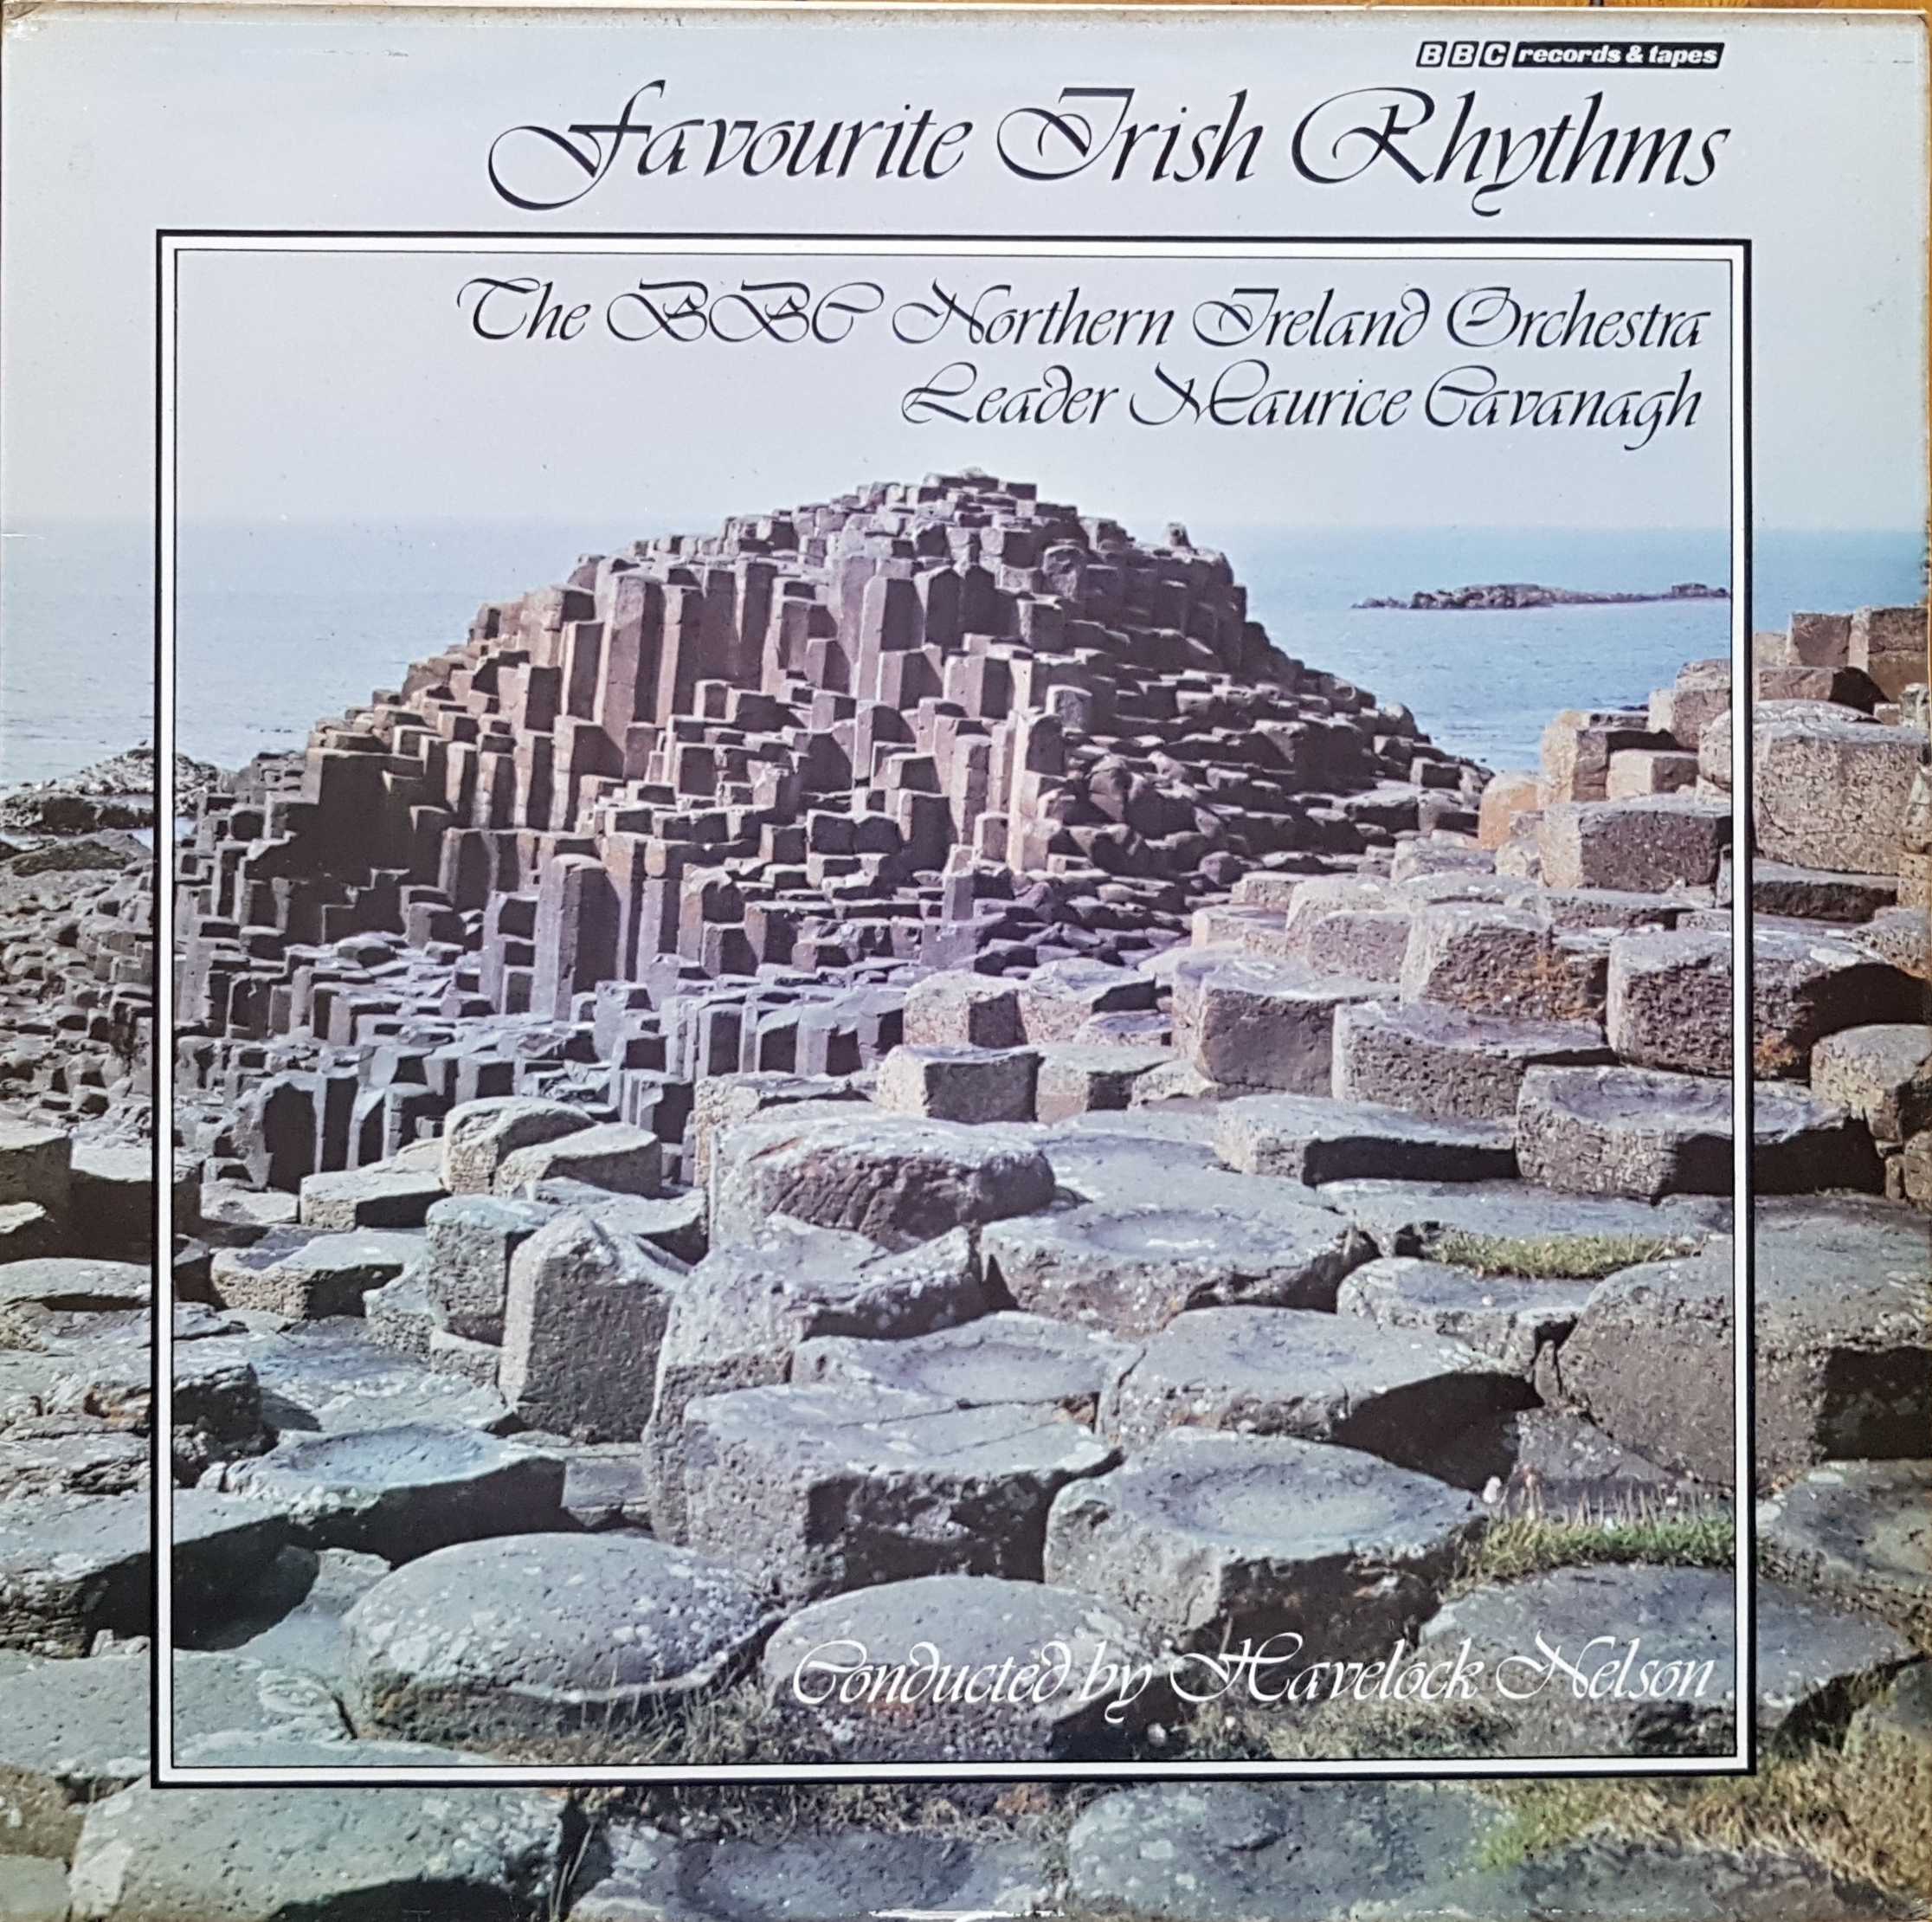 Picture of REC 289 Favourite Irish rhythms by artist Various from the BBC albums - Records and Tapes library